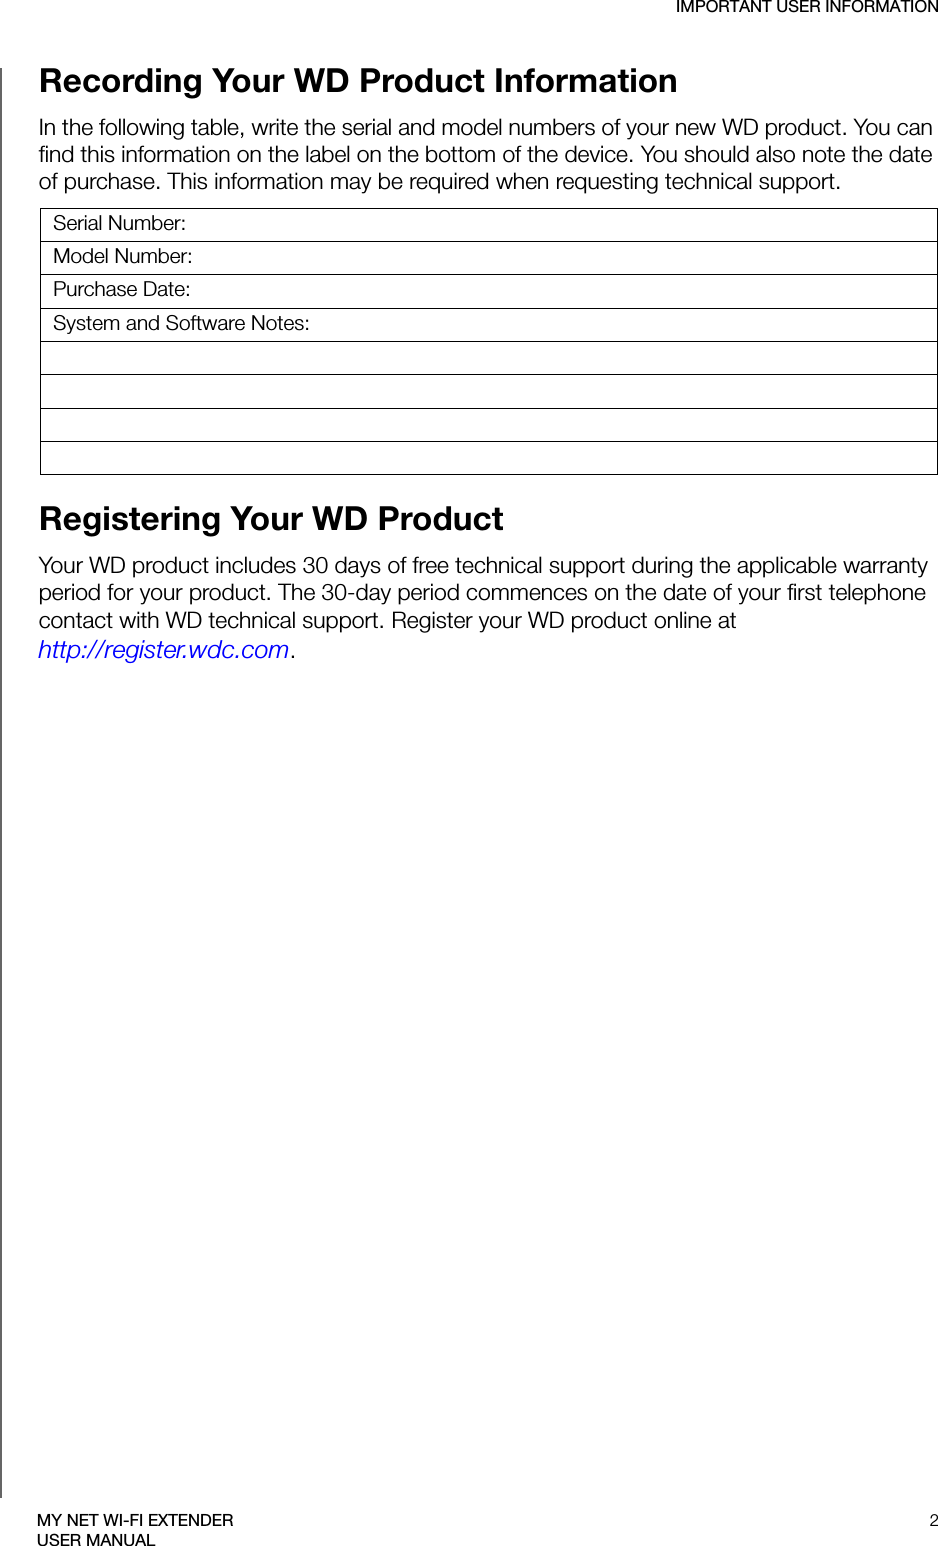 IMPORTANT USER INFORMATION2MY NET WI-FI EXTENDERUSER MANUALRecording Your WD Product Information In the following table, write the serial and model numbers of your new WD product. You can find this information on the label on the bottom of the device. You should also note the date of purchase. This information may be required when requesting technical support. Registering Your WD Product Your WD product includes 30 days of free technical support during the applicable warranty period for your product. The 30-day period commences on the date of your first telephone contact with WD technical support. Register your WD product online at  http://register.wdc.com.Serial Number:Model Number:Purchase Date:System and Software Notes: